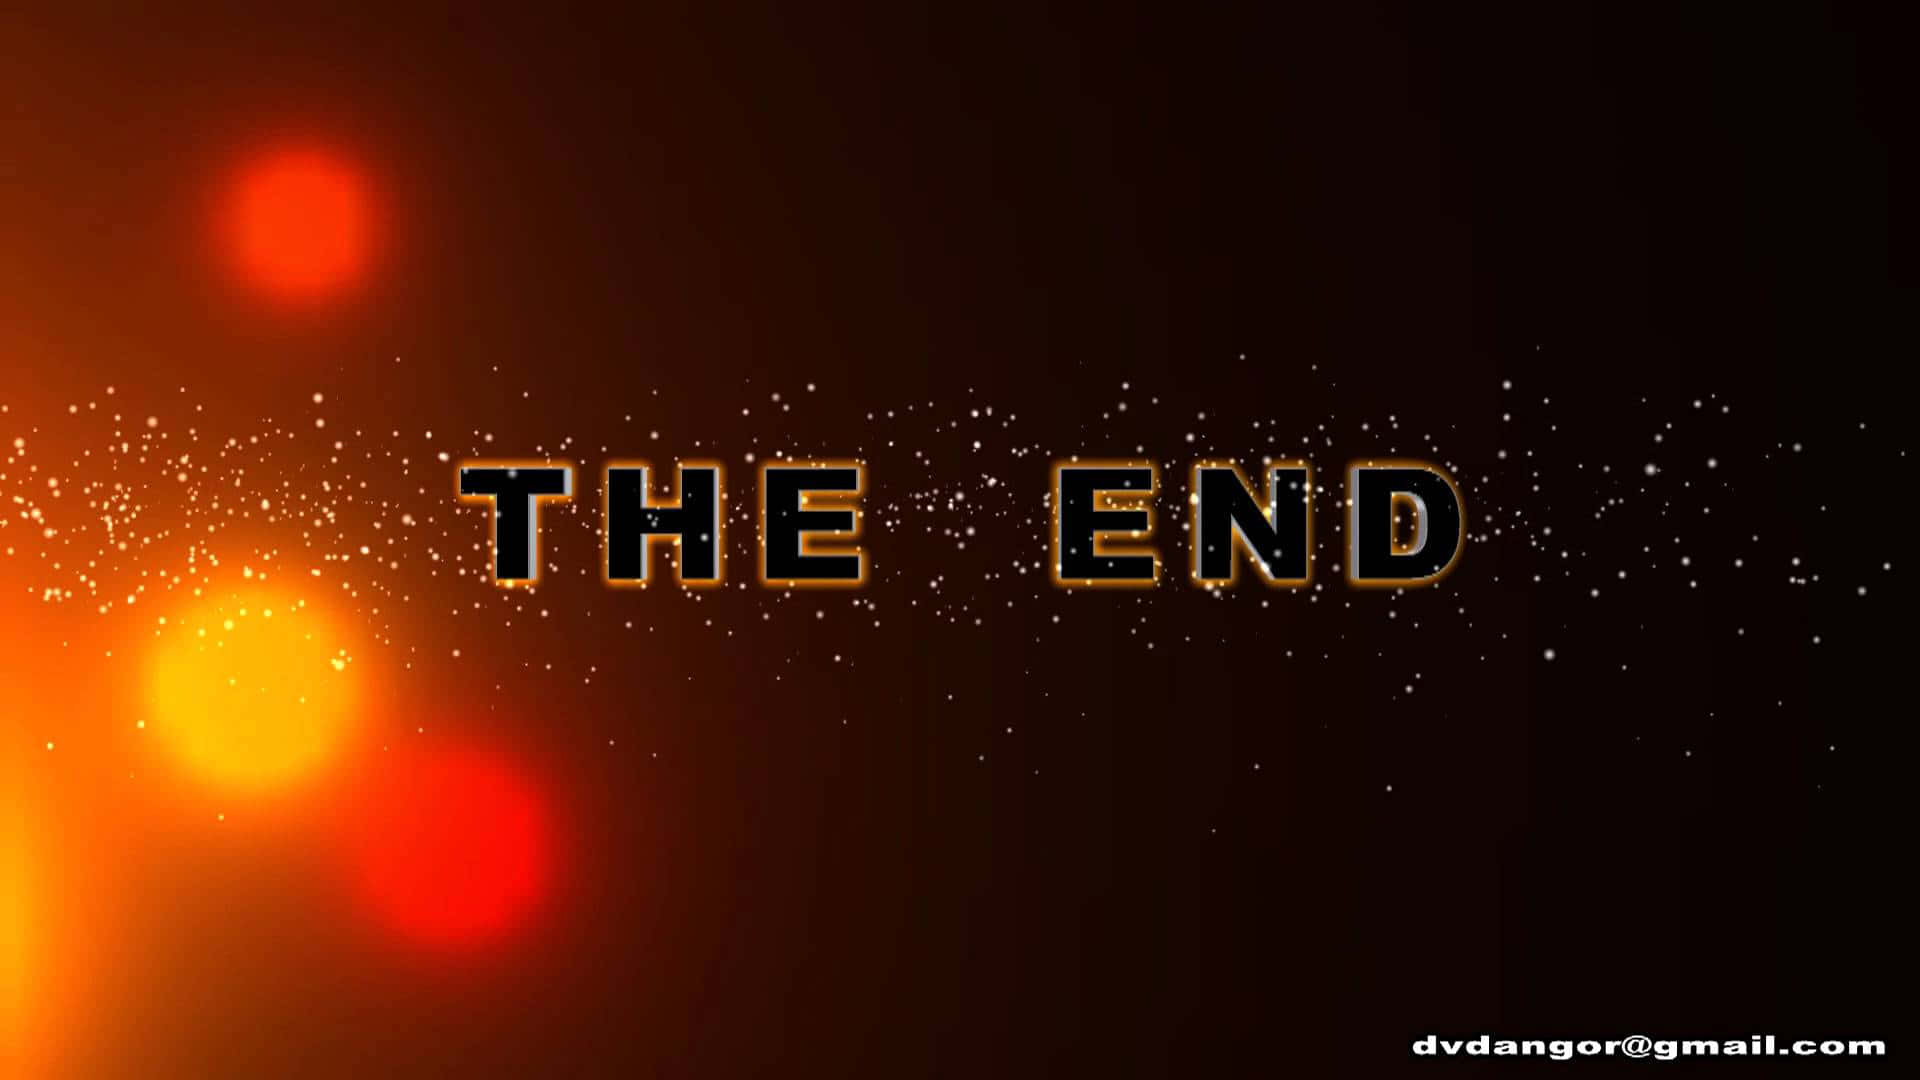 It's The End Of The Journey Wallpaper